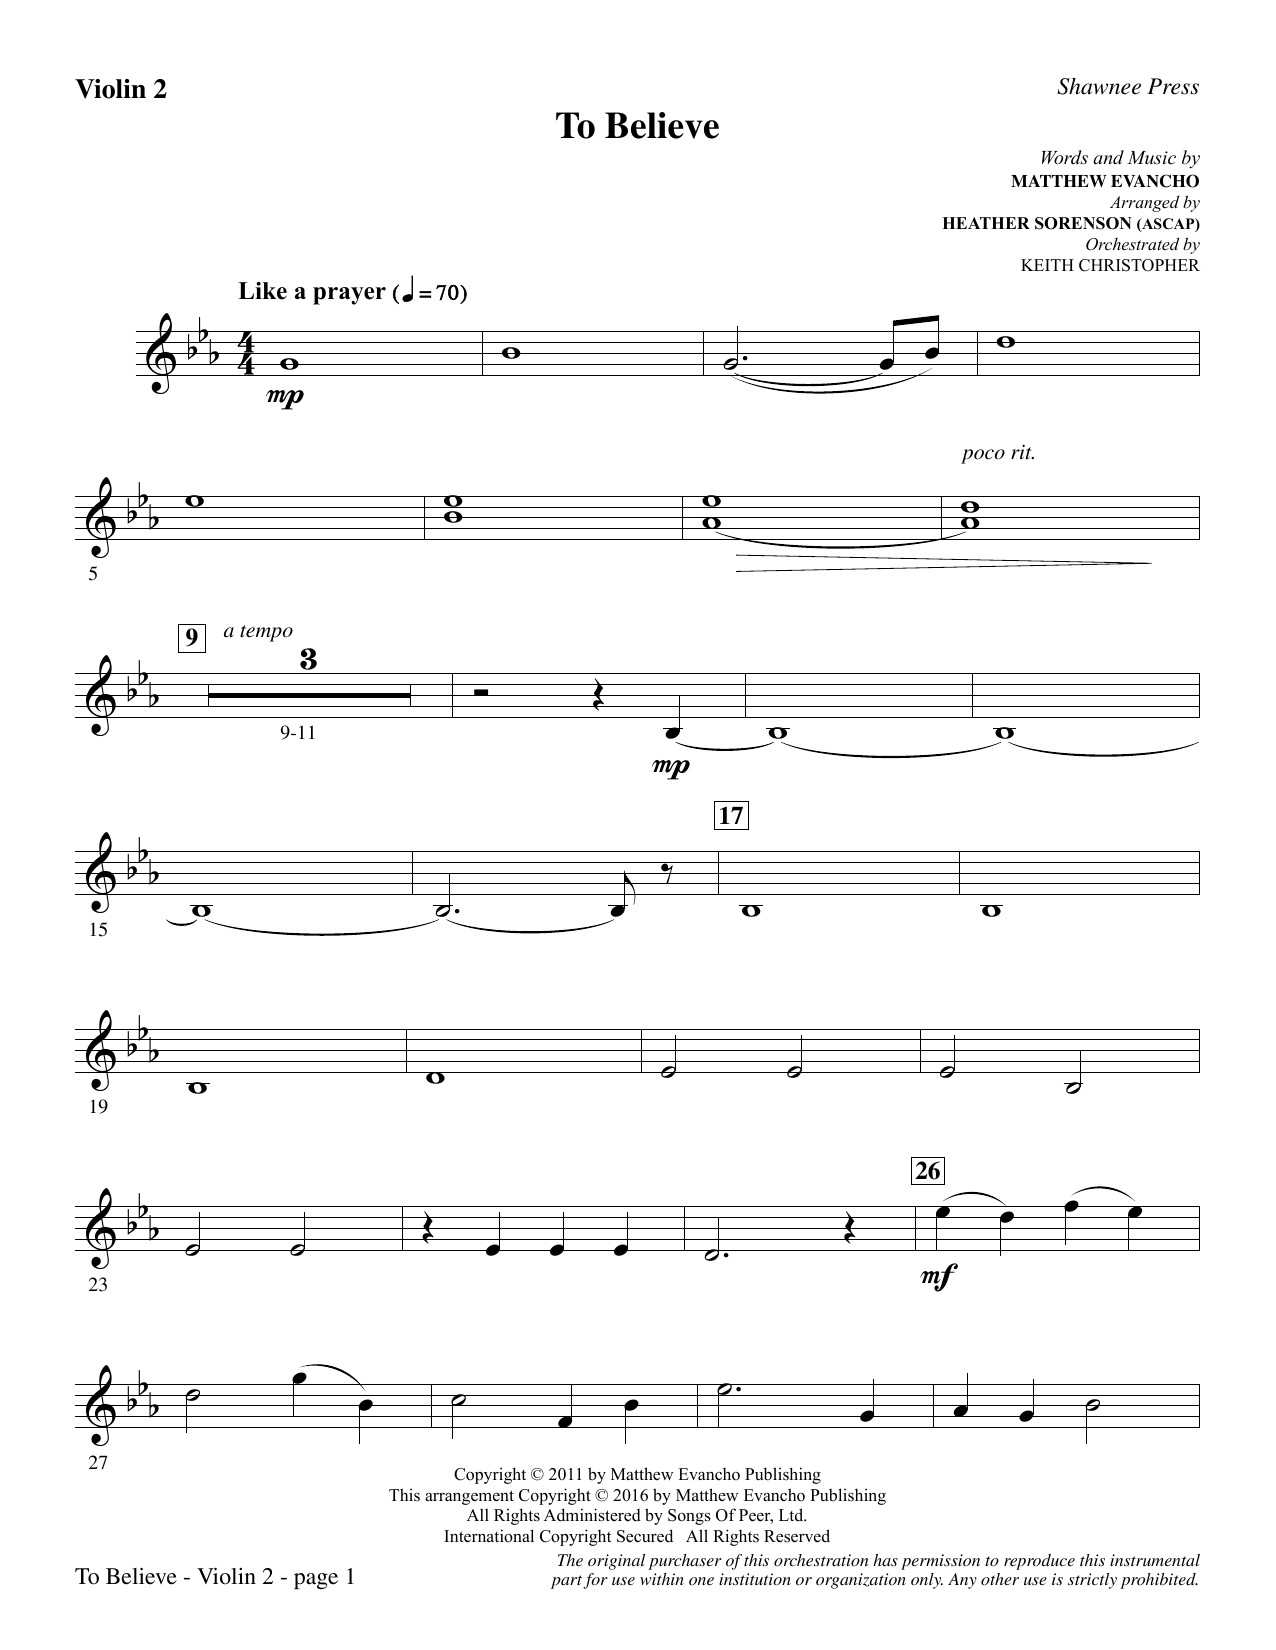 Download Heather Sorenson To Believe - Violin 2 sheet music and printable PDF score & Inspirational music notes